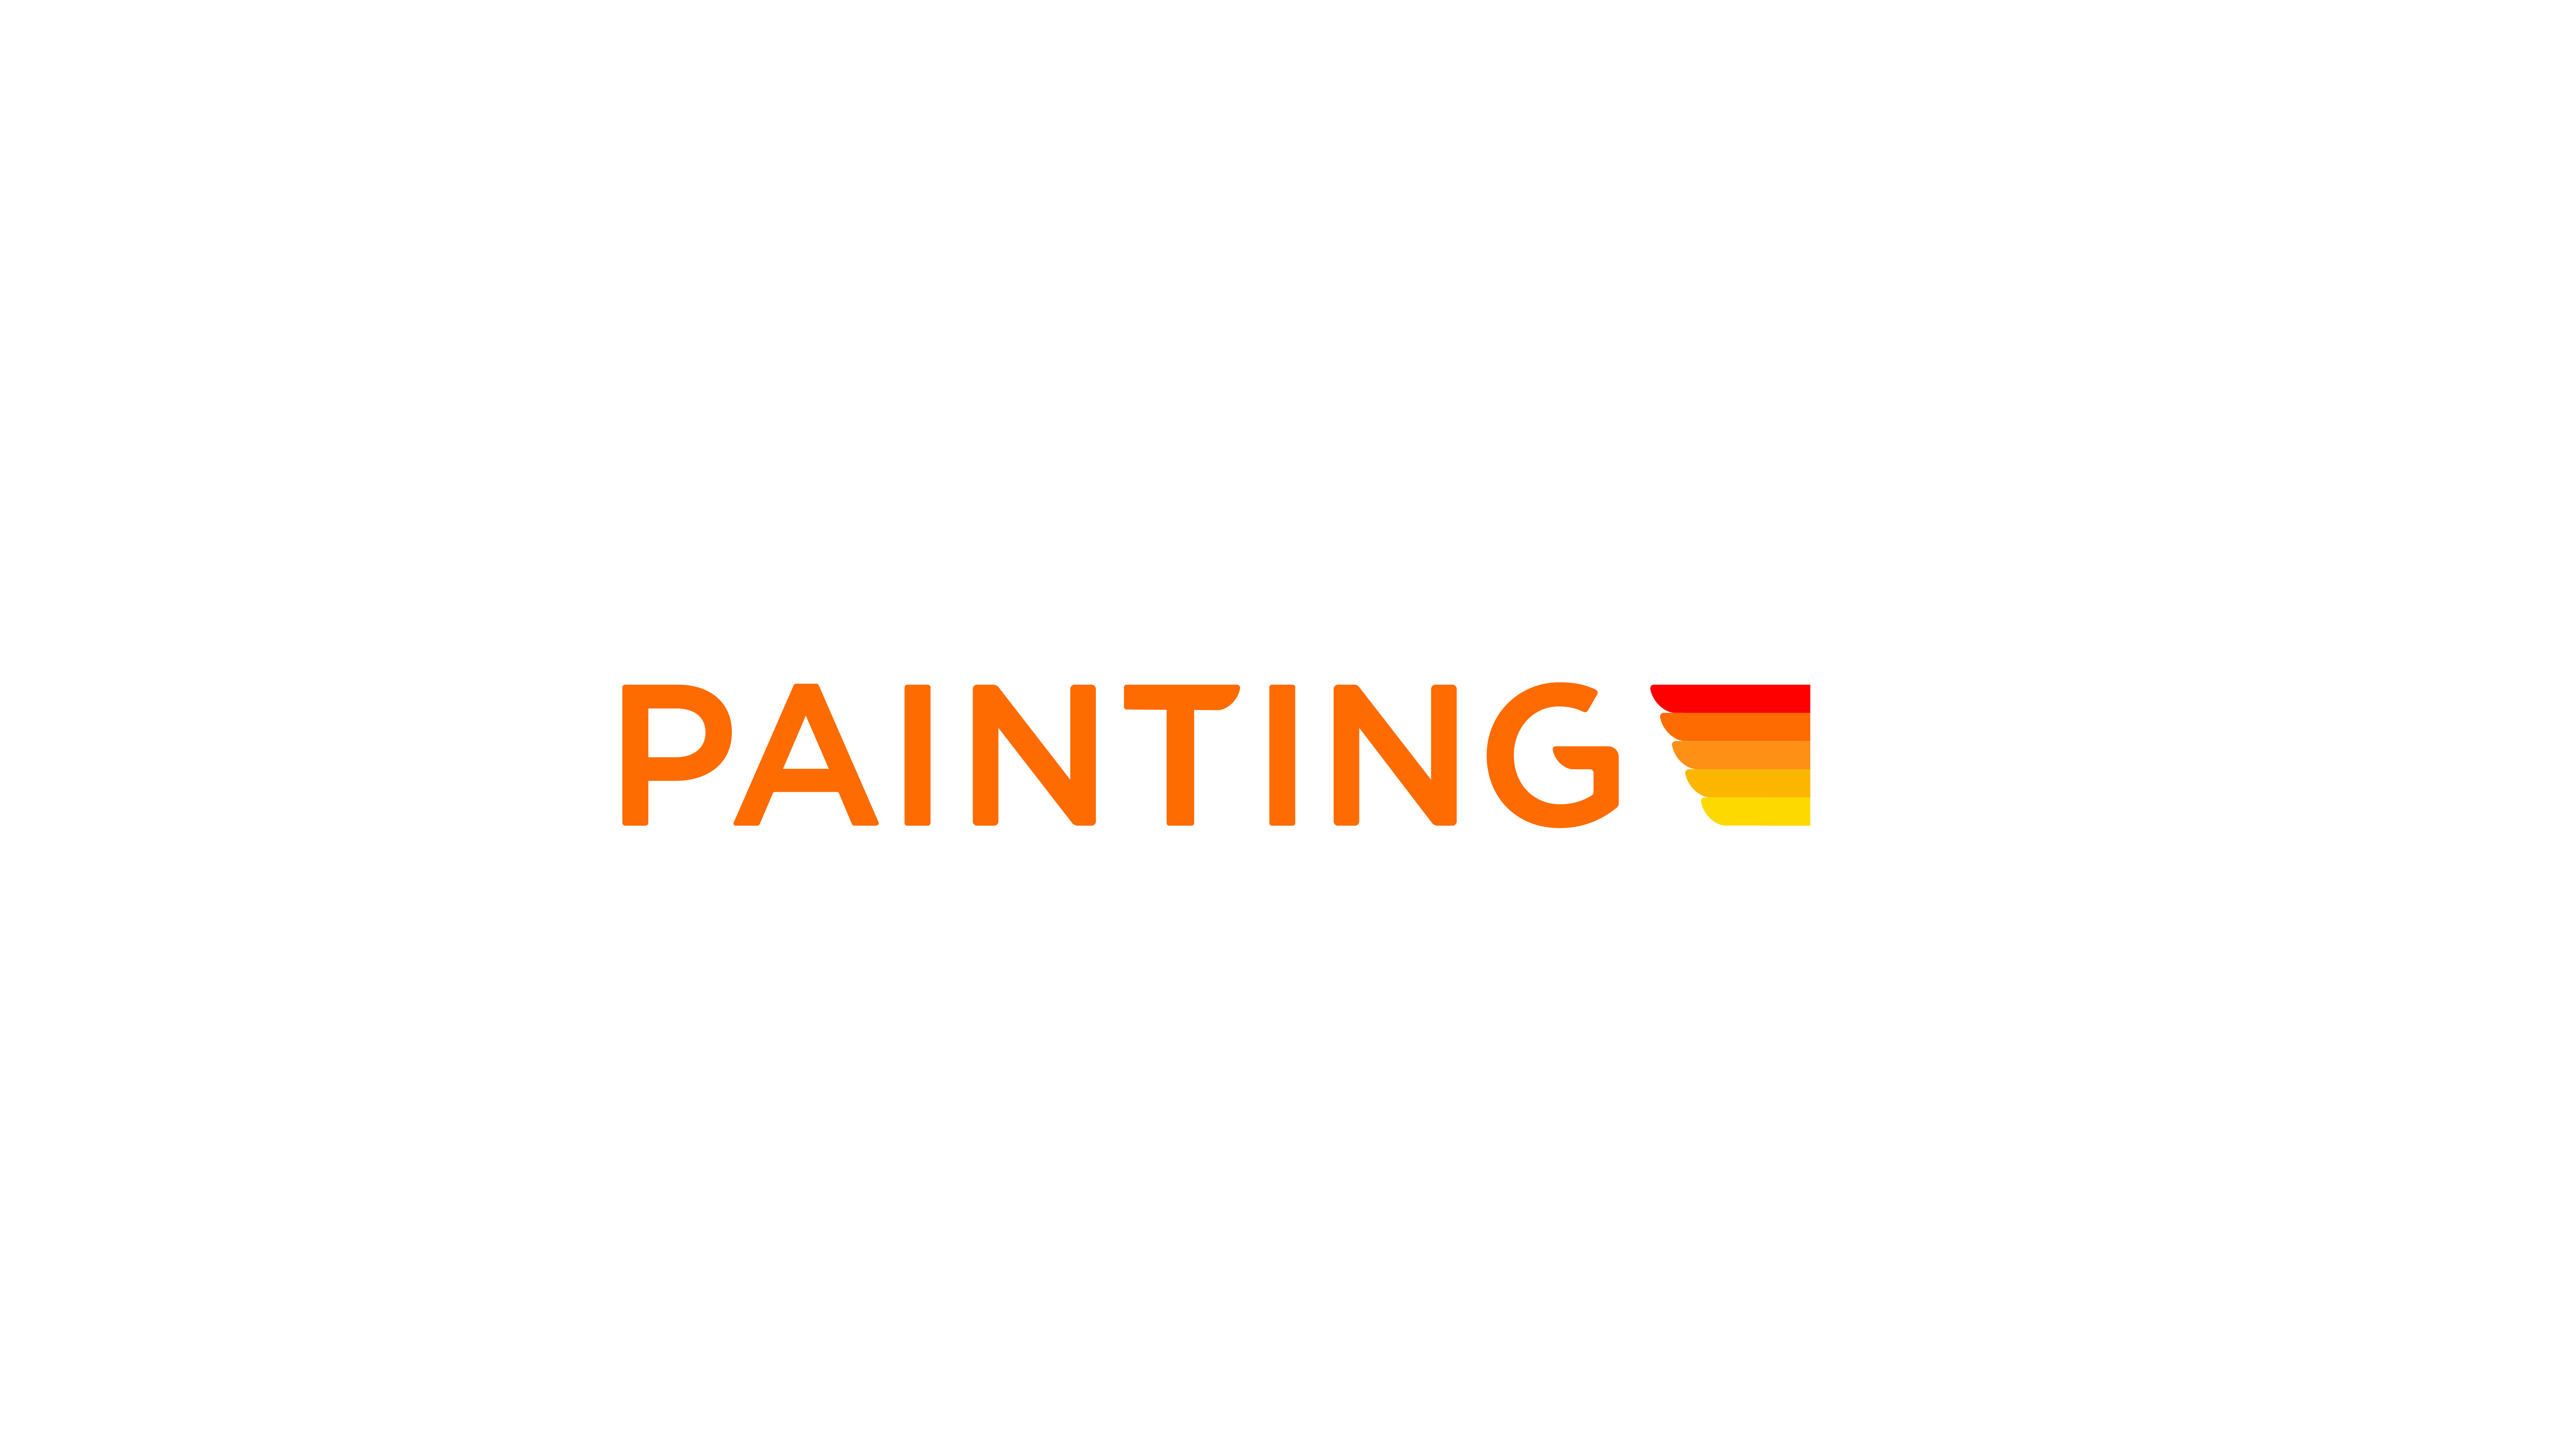 Five Star Painting of Newmarket & Caledon